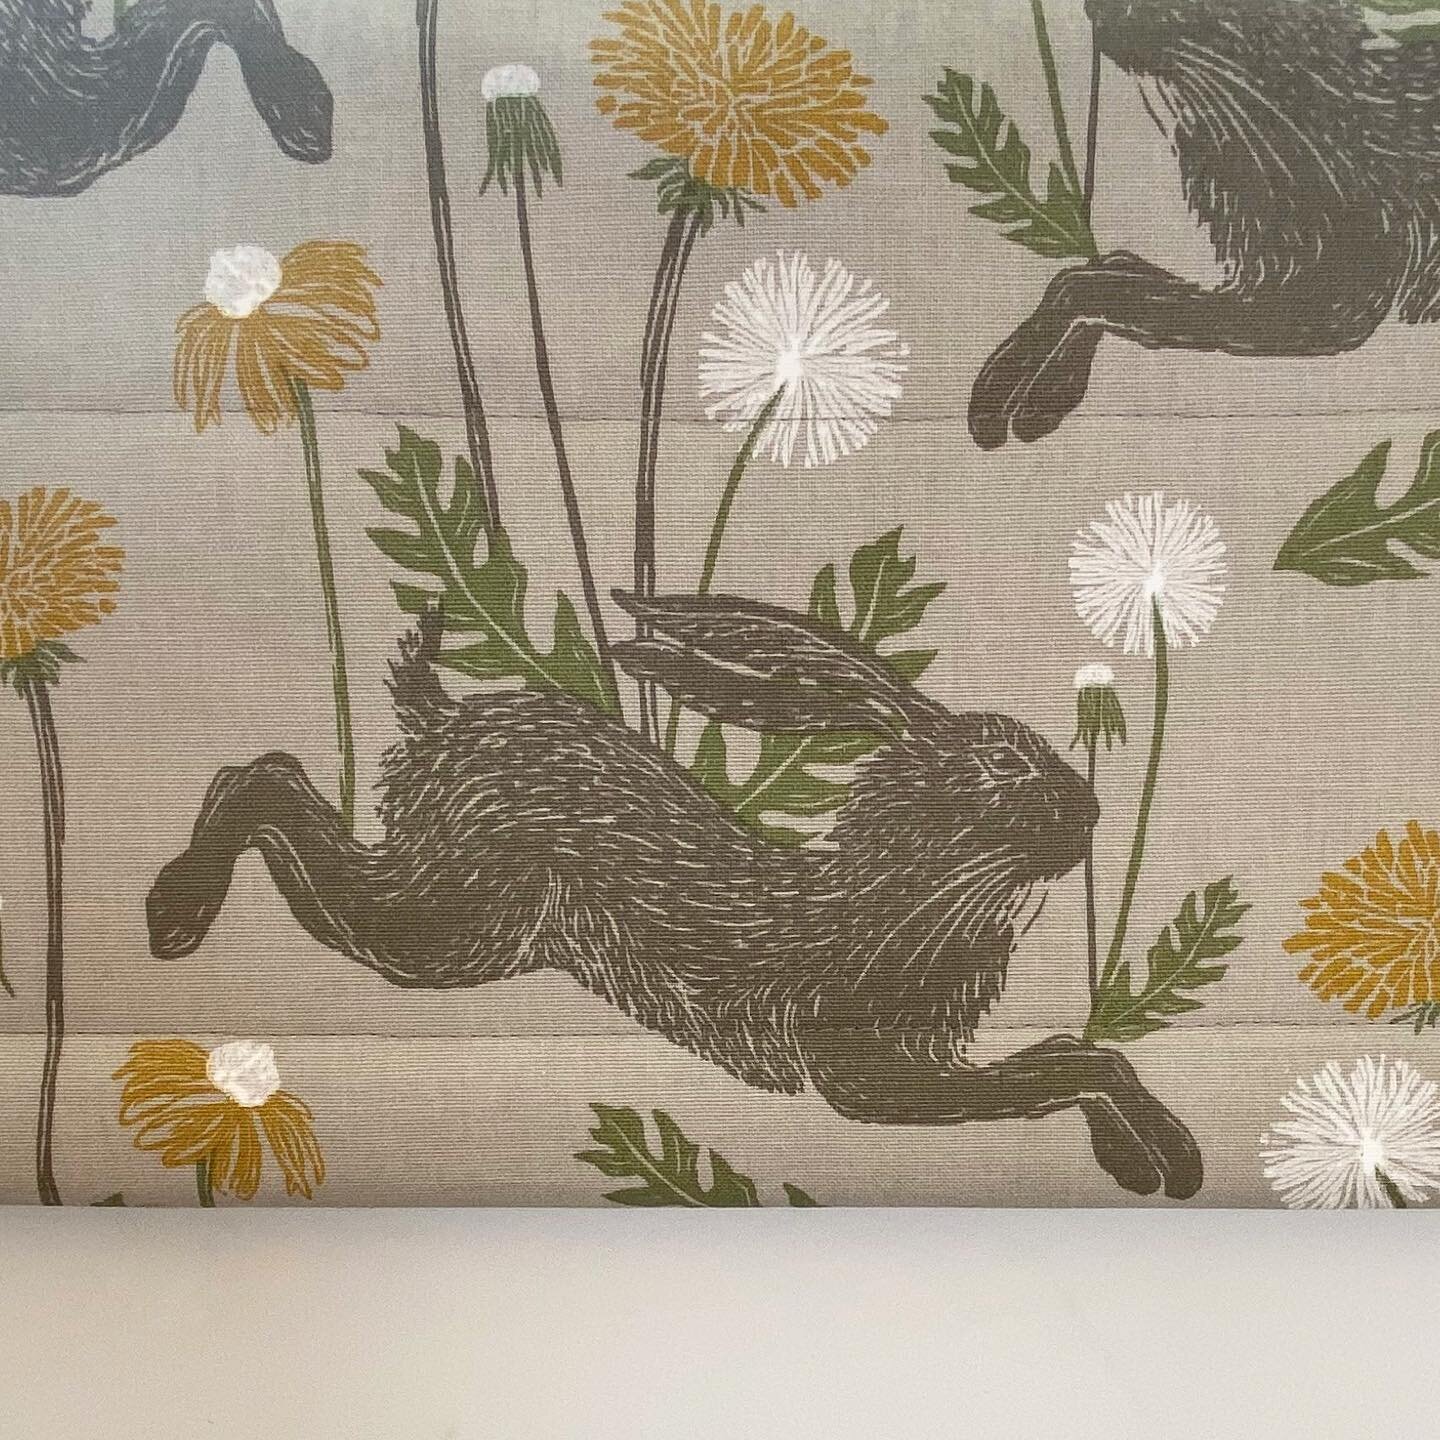 Not only do we like the take the time to choose where the pattern will sit best but also how could you cut off part of the bunny! This was a roman blind for a little one! #romanblind #handmade #bespokeblind #bespokeromanblind #skipton #madeinyorkshir